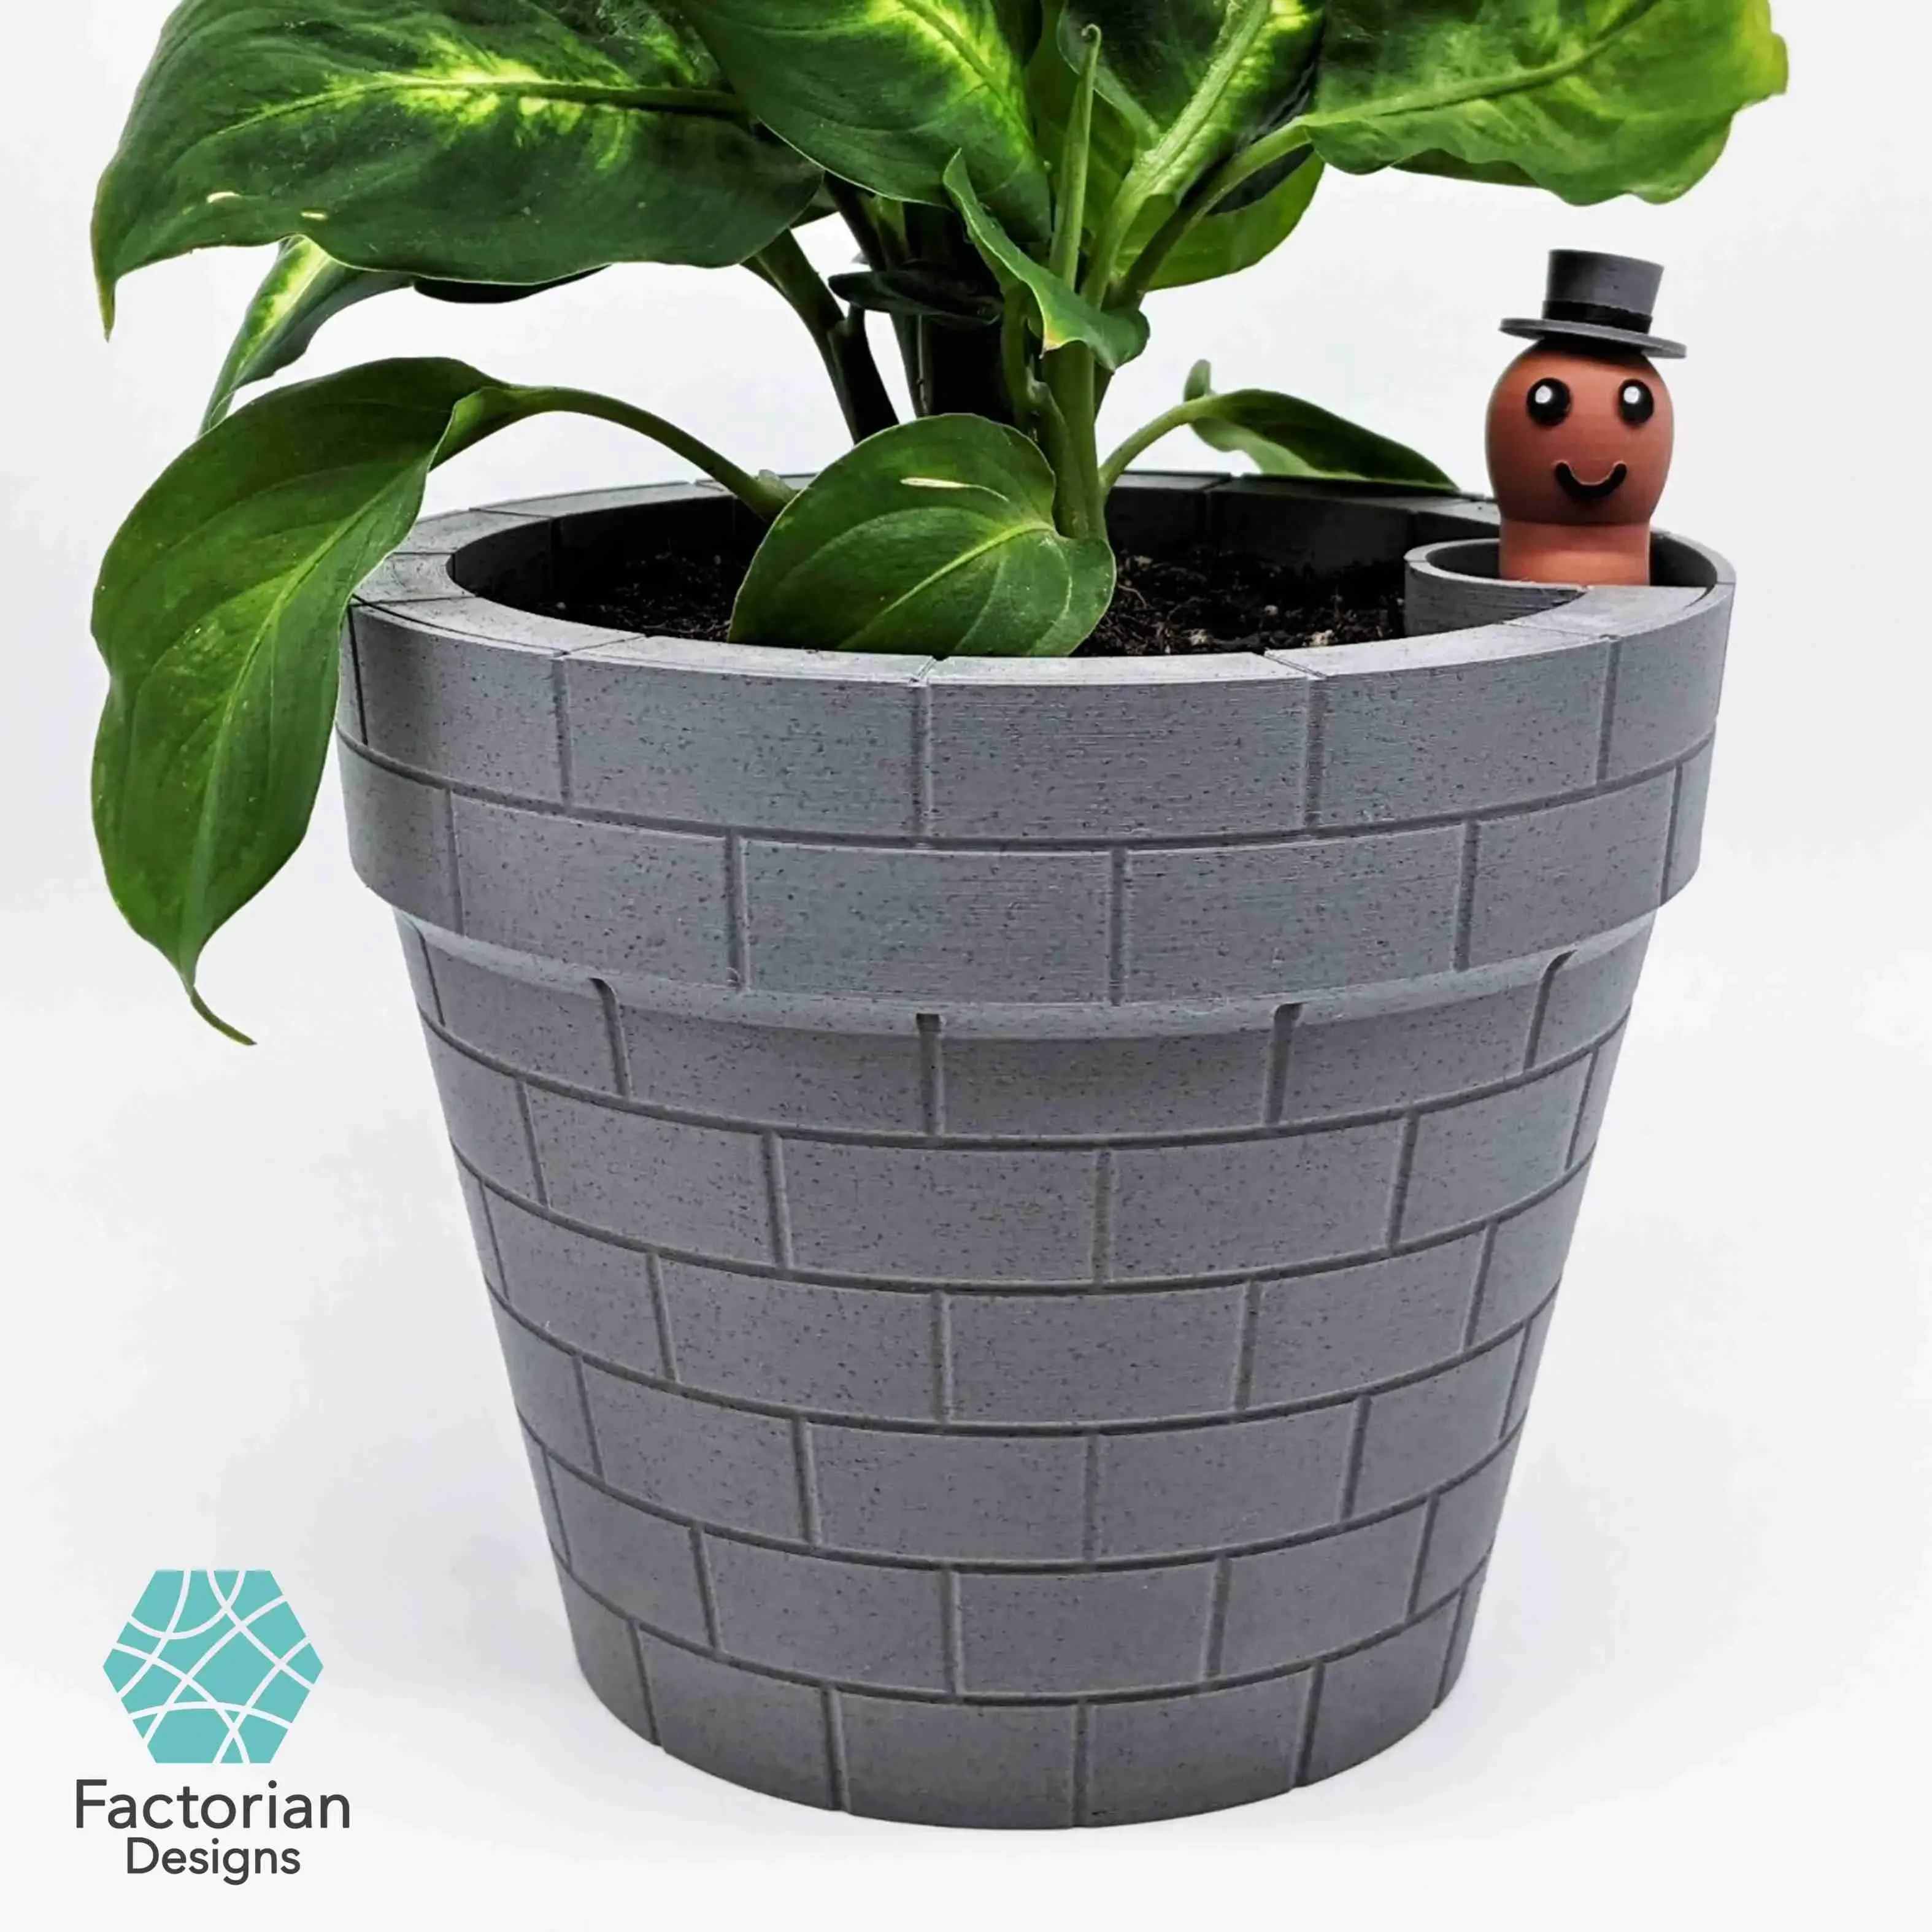 Self-Watering Plant Pot with a Gentleman Earthworm Companion